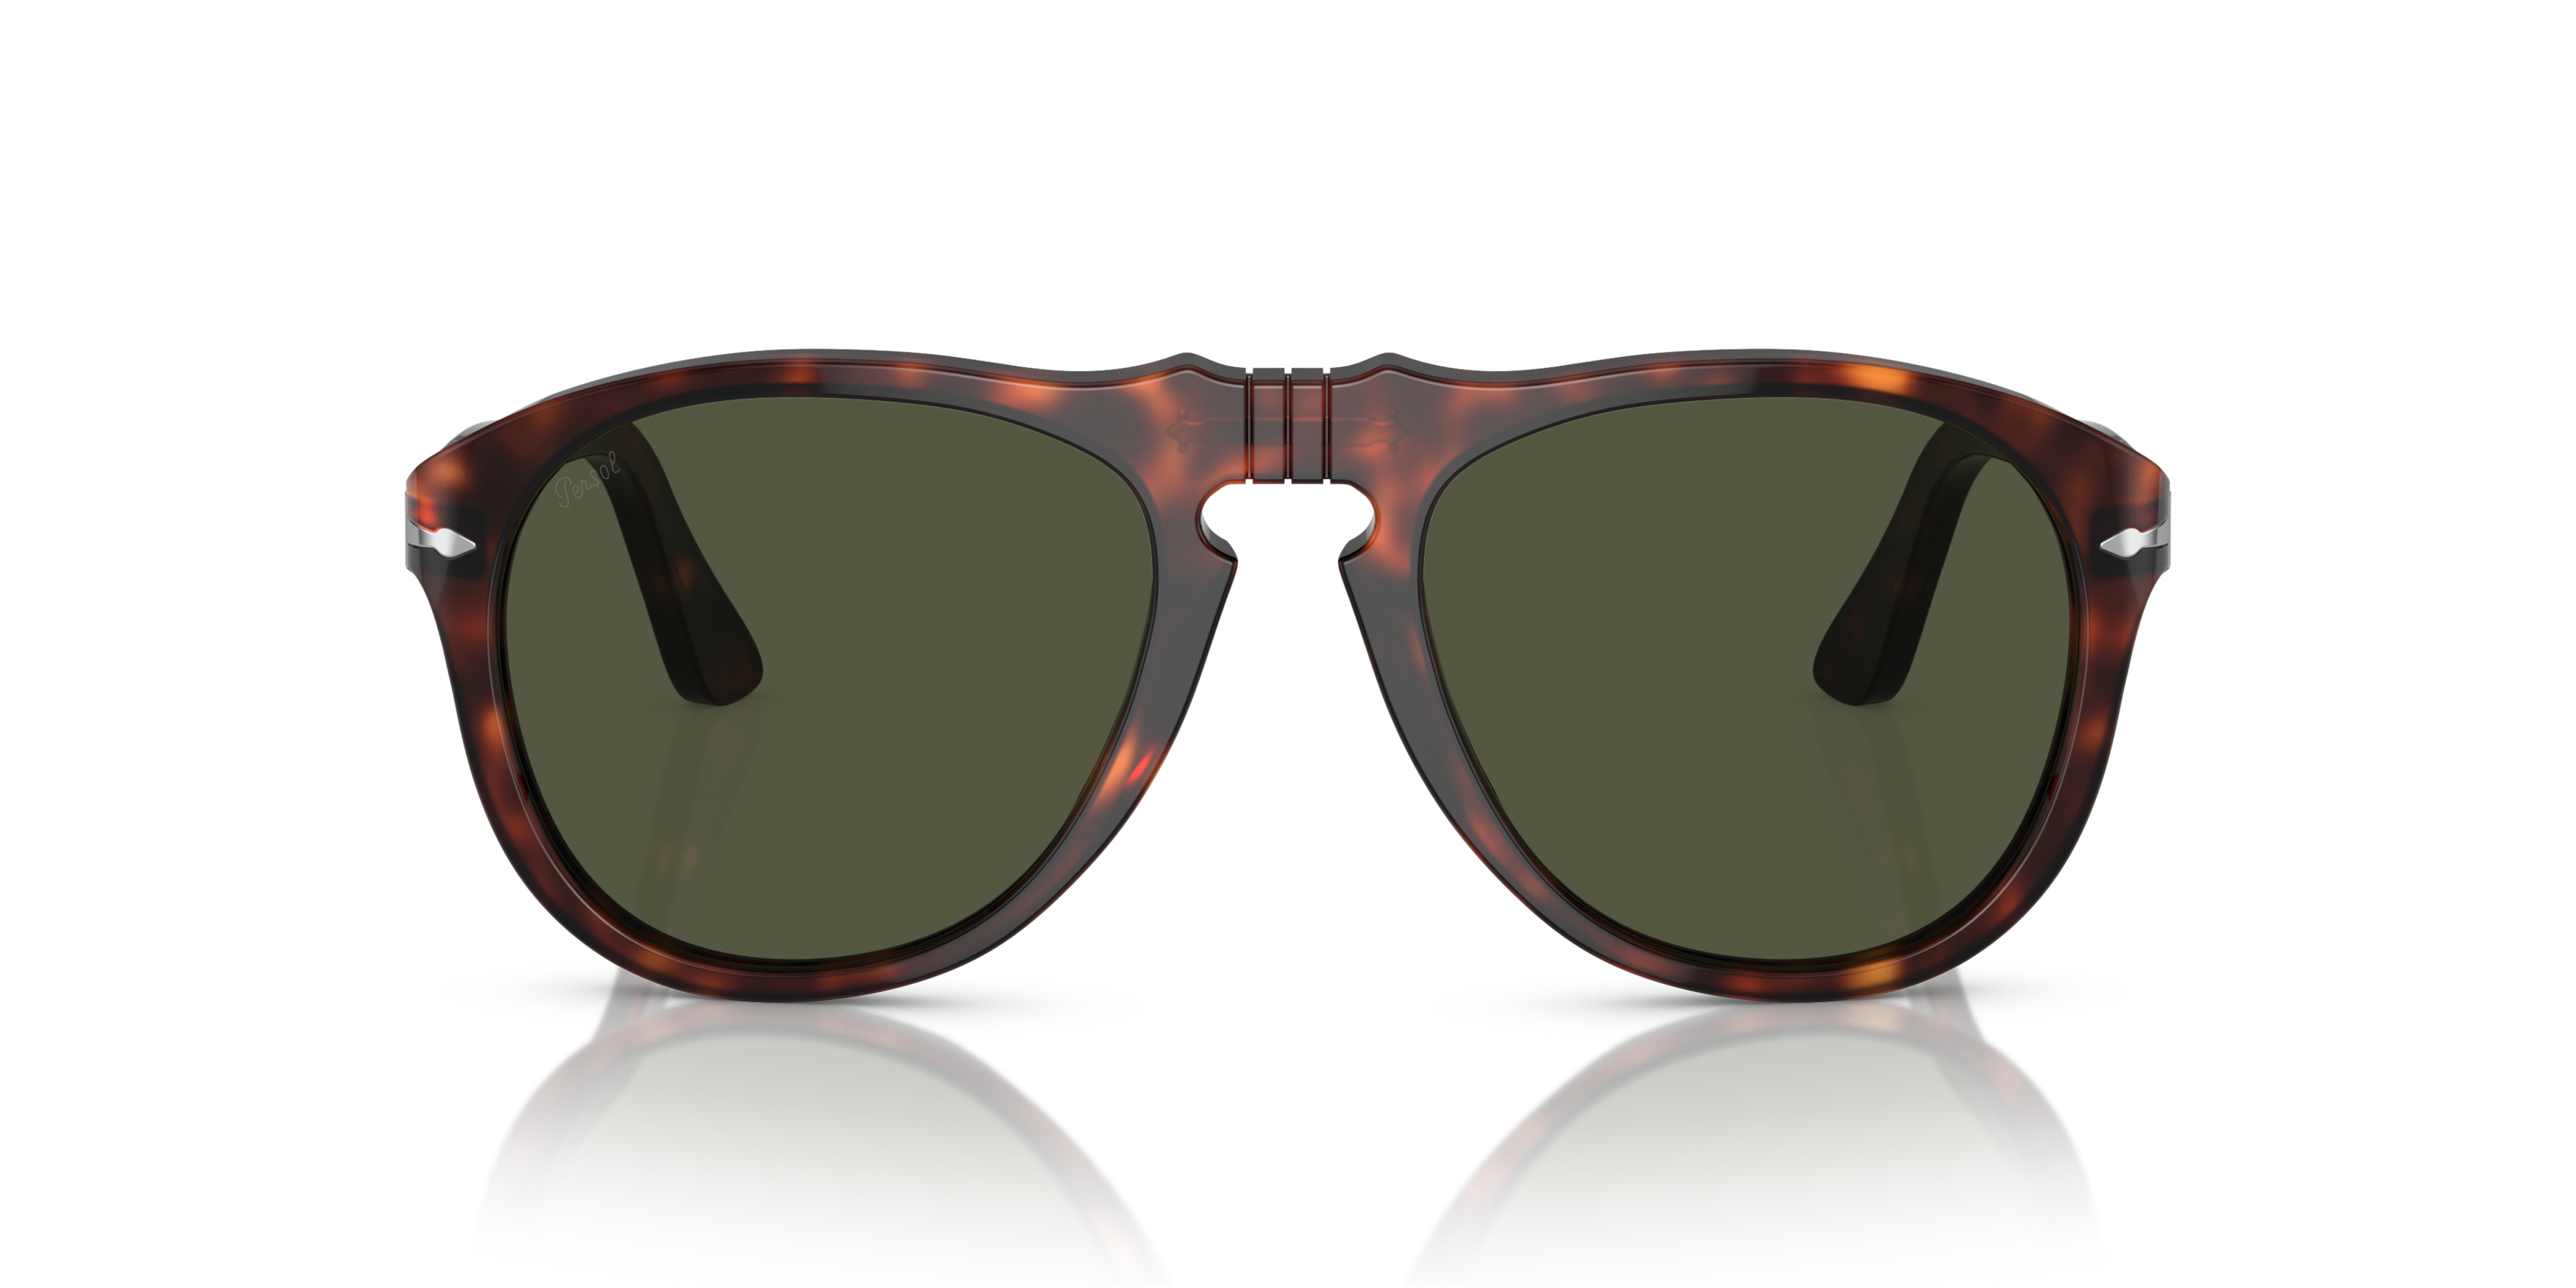 [products.image.front] Persol PO0649 24/31